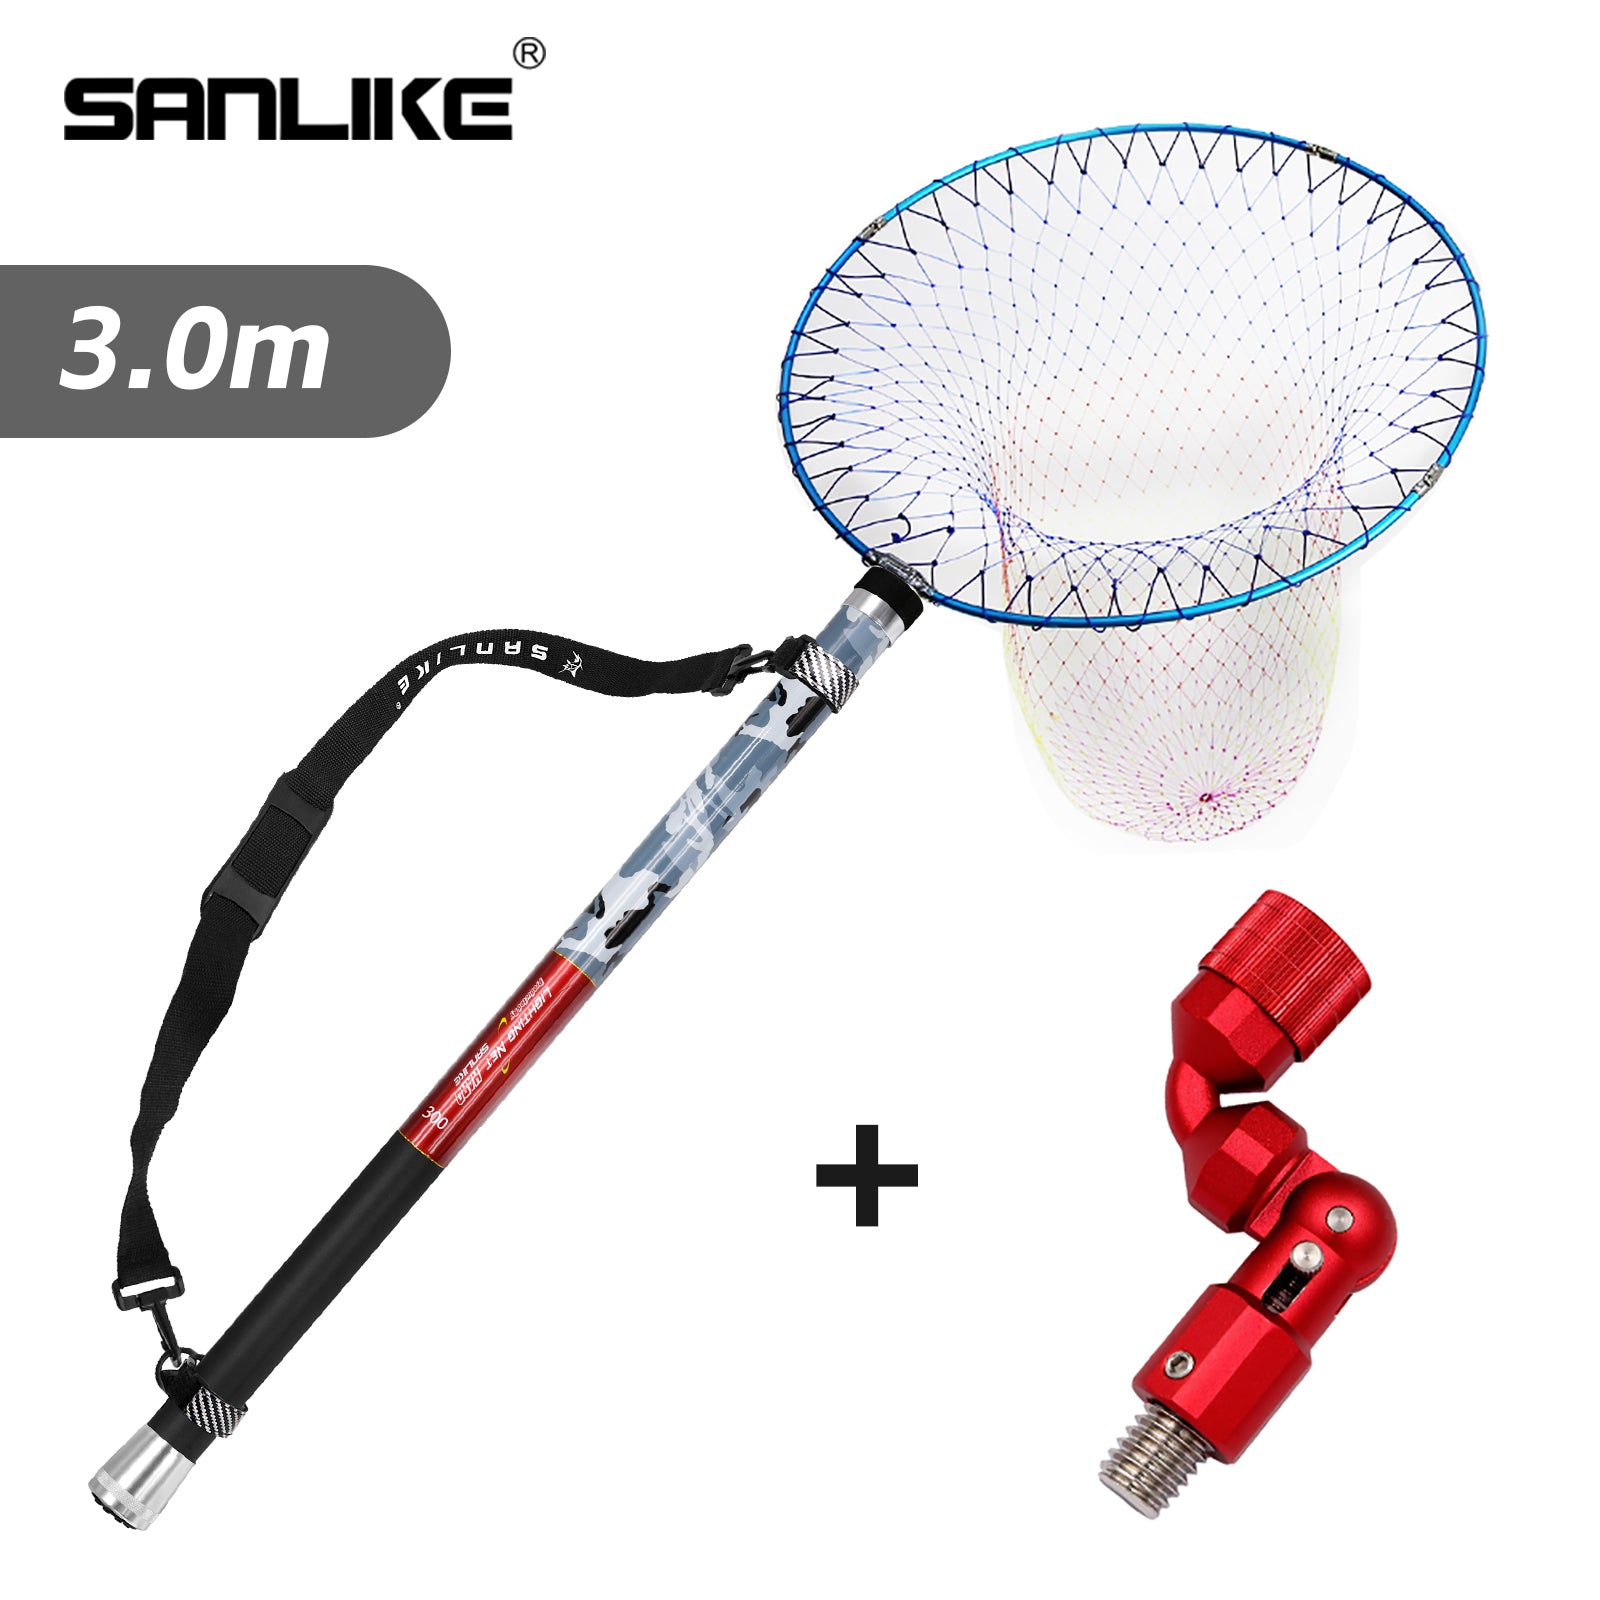 Betterz Foldable Aluminum Alloy Handle Fly Fishing Landing Net Catch Release Tackle, As The Picture